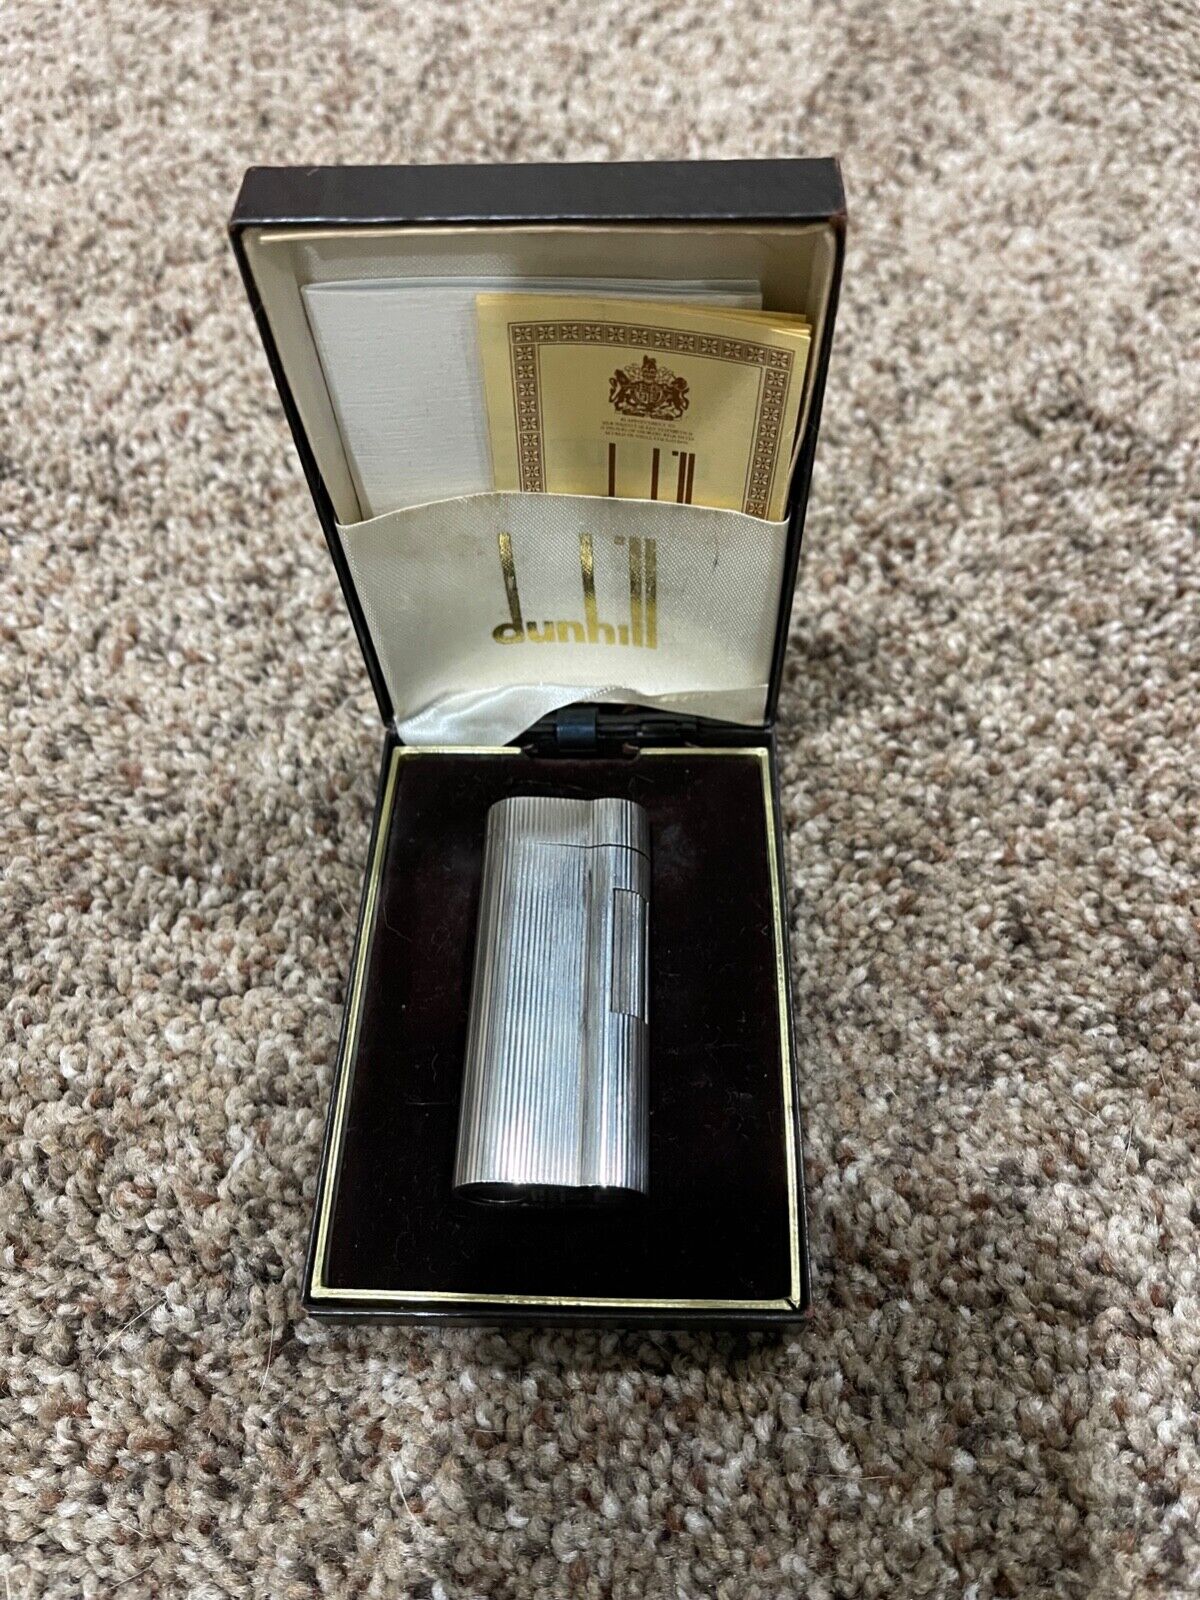 Dunhill Rollagas SType Silver Vintage Cigar Lighter w/ Box and Papers ...